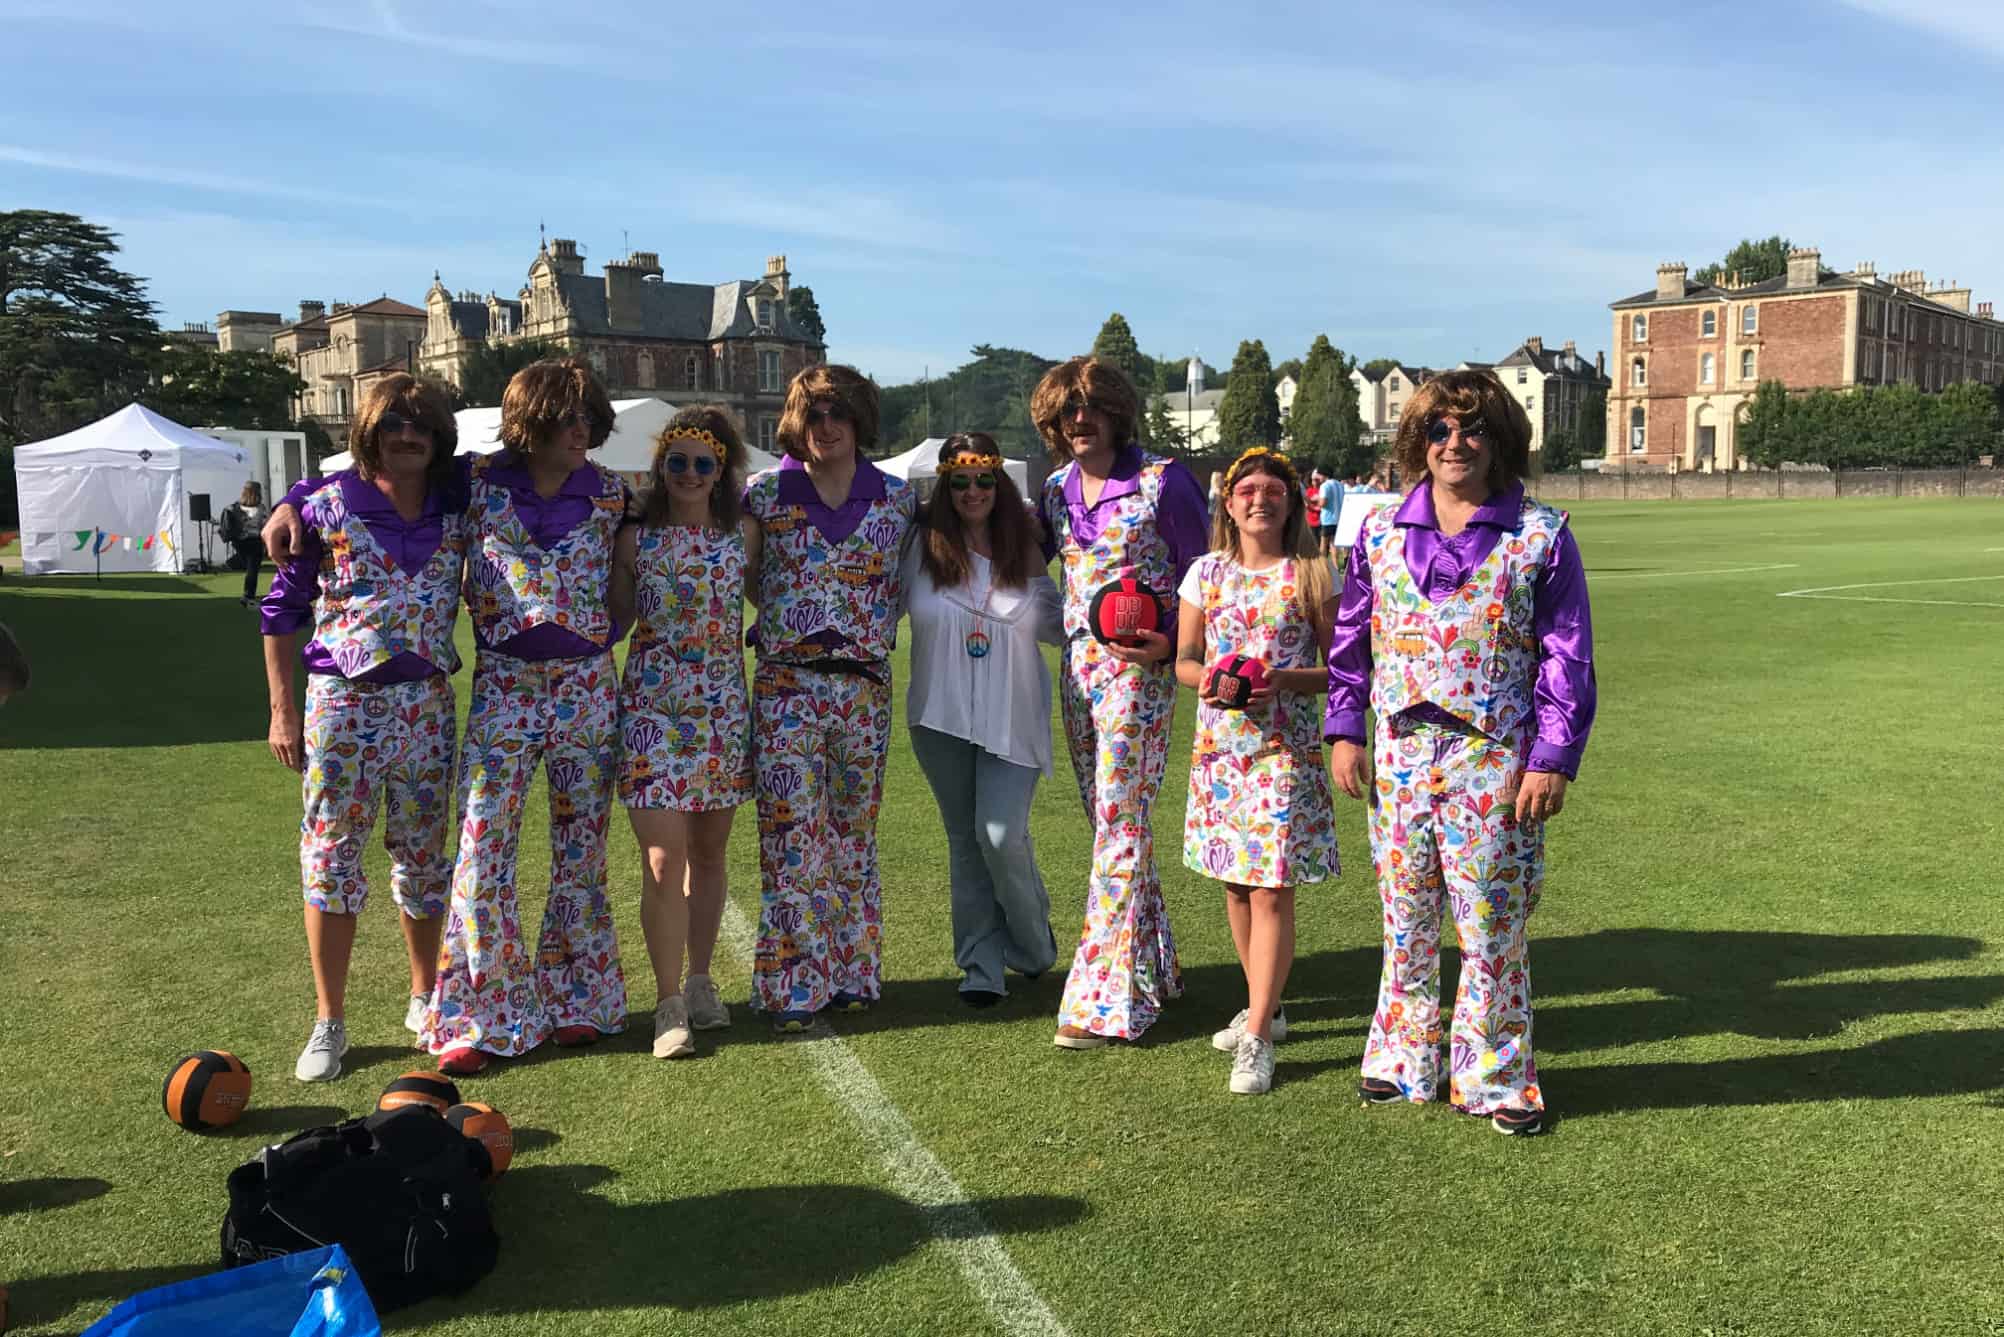 Dodgeball tournament participants dressed in 1970s fancy dress